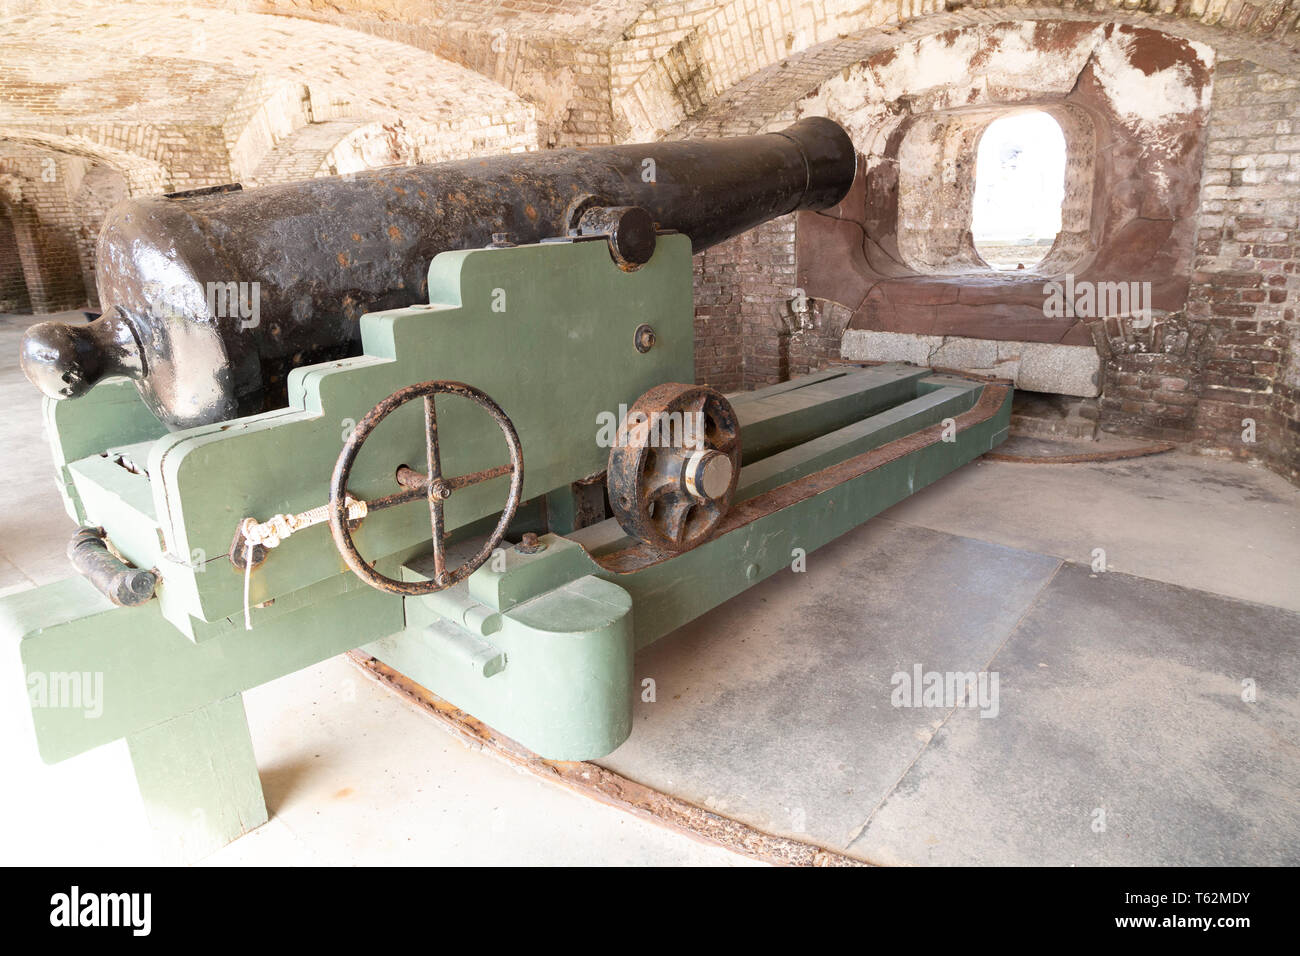 Gun at Fort Sumter near Charleston in South Carolina, USA. The fort was the target of the opening shots of the American Civil War. Stock Photo